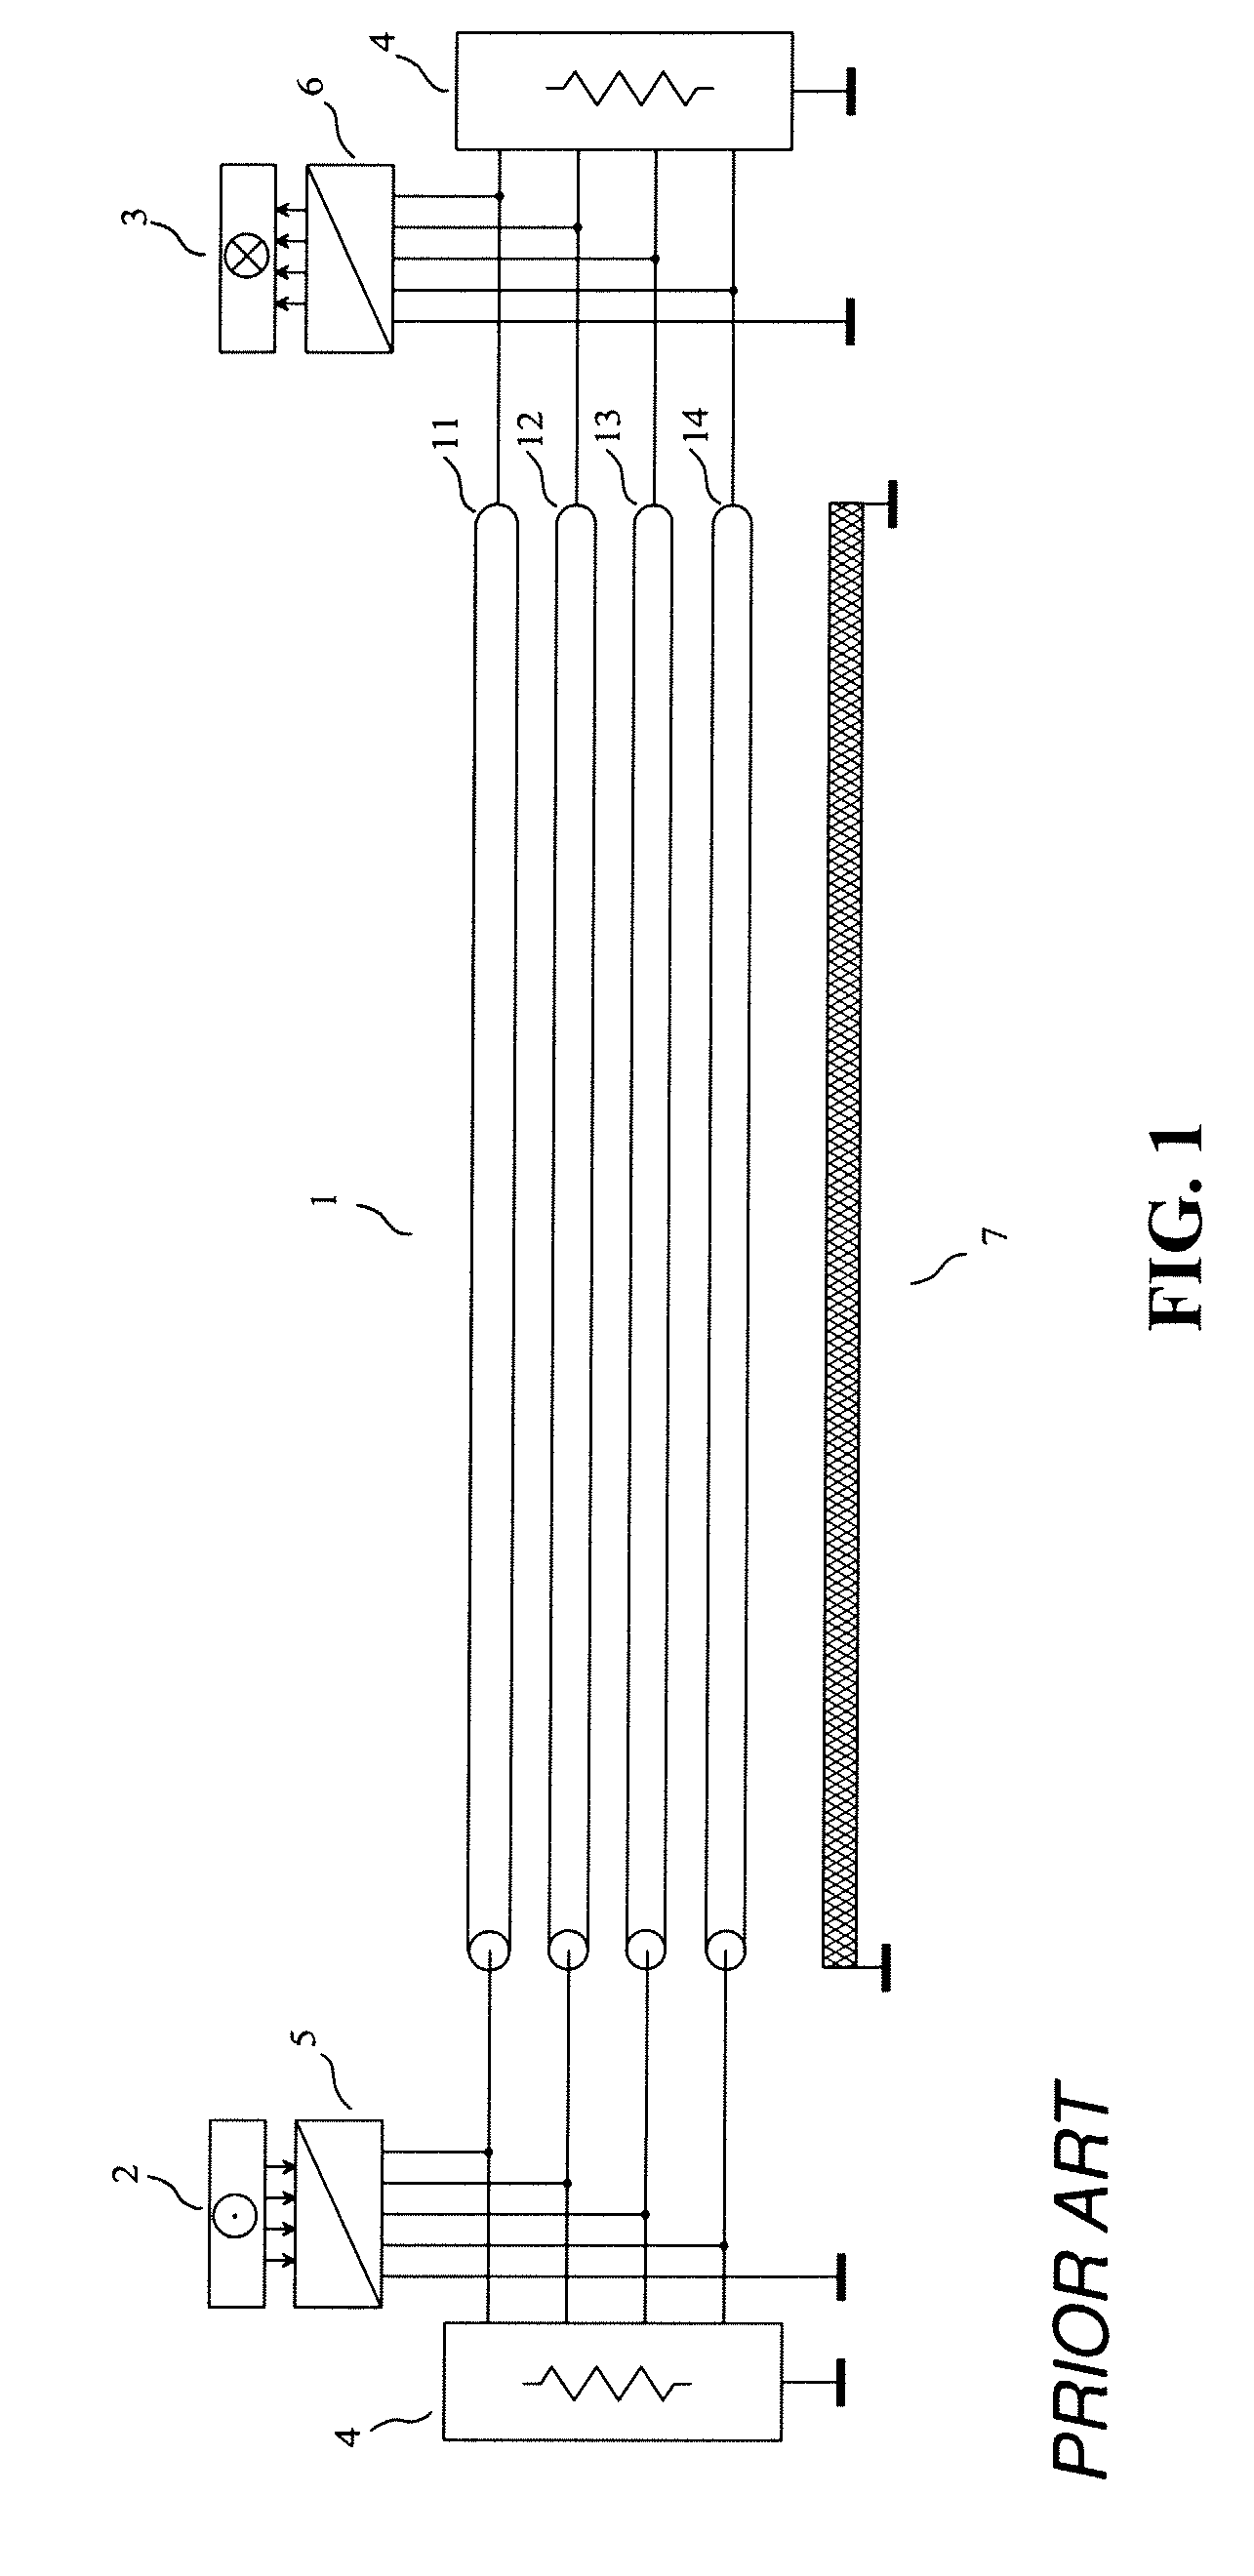 Multichannel interfacing device having a termination circuit